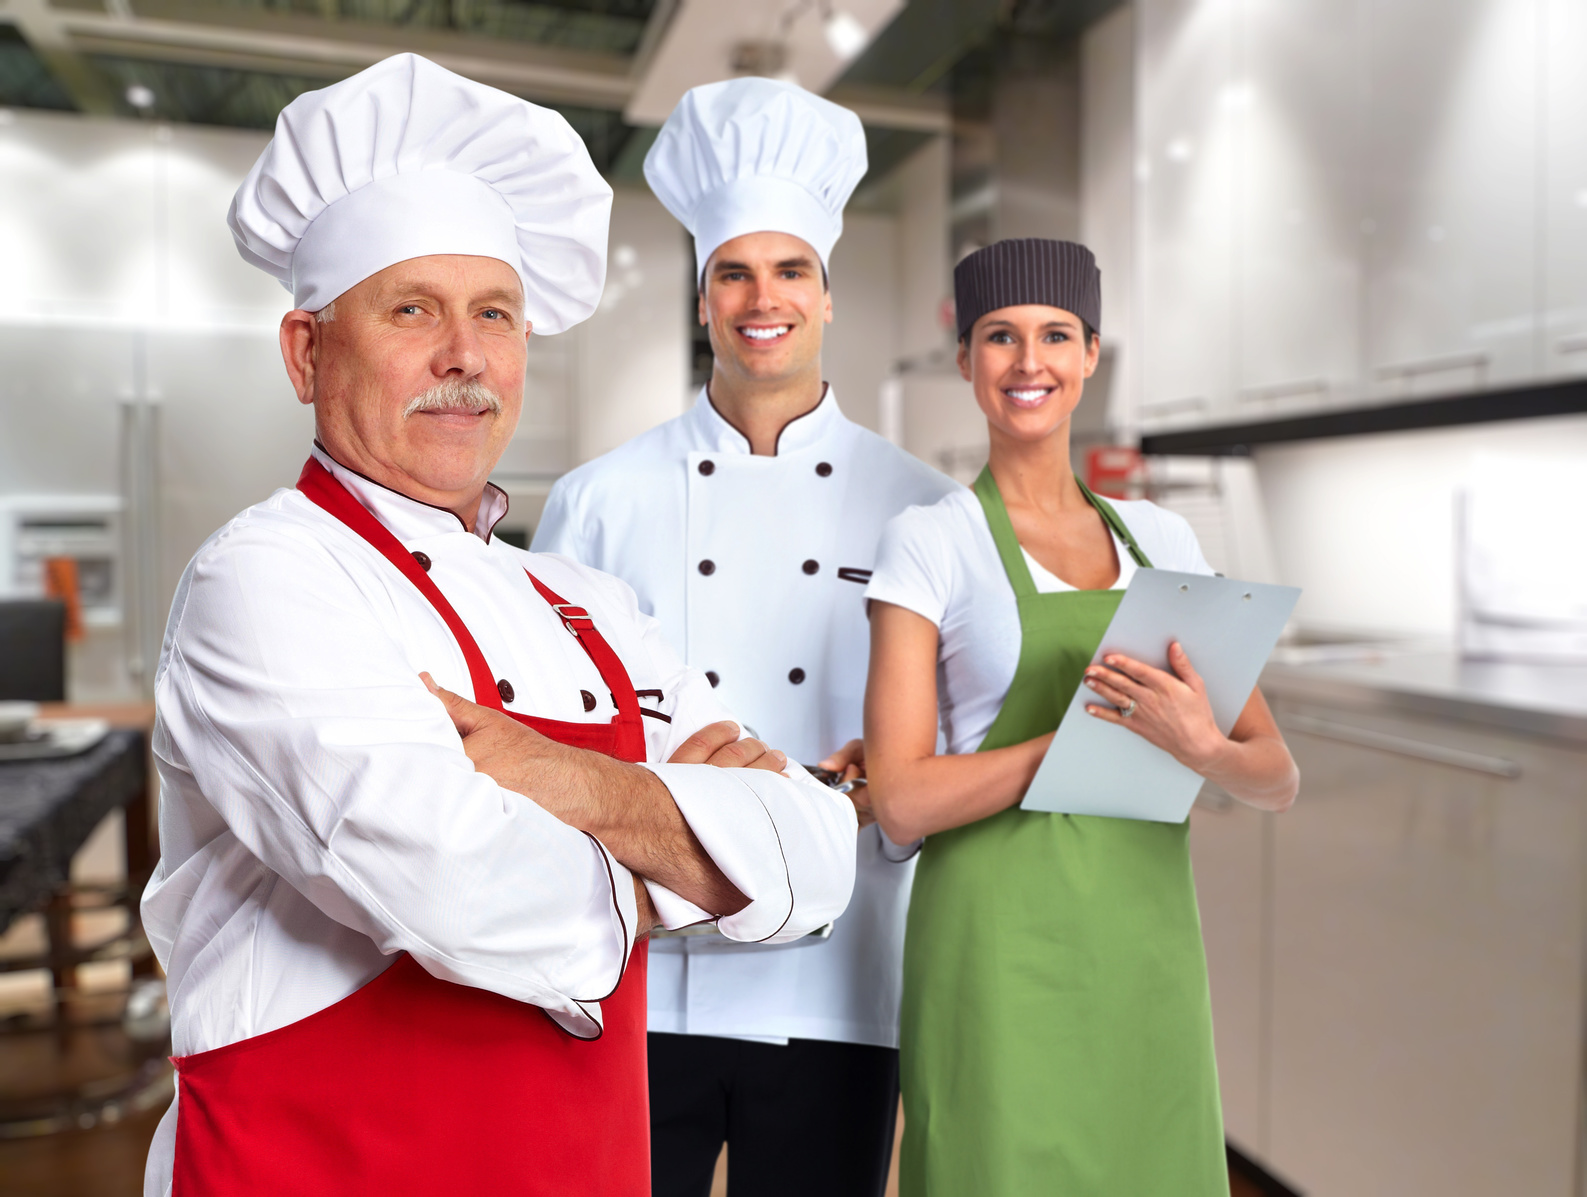 Three Chefs In Uniform Two Males And One Female